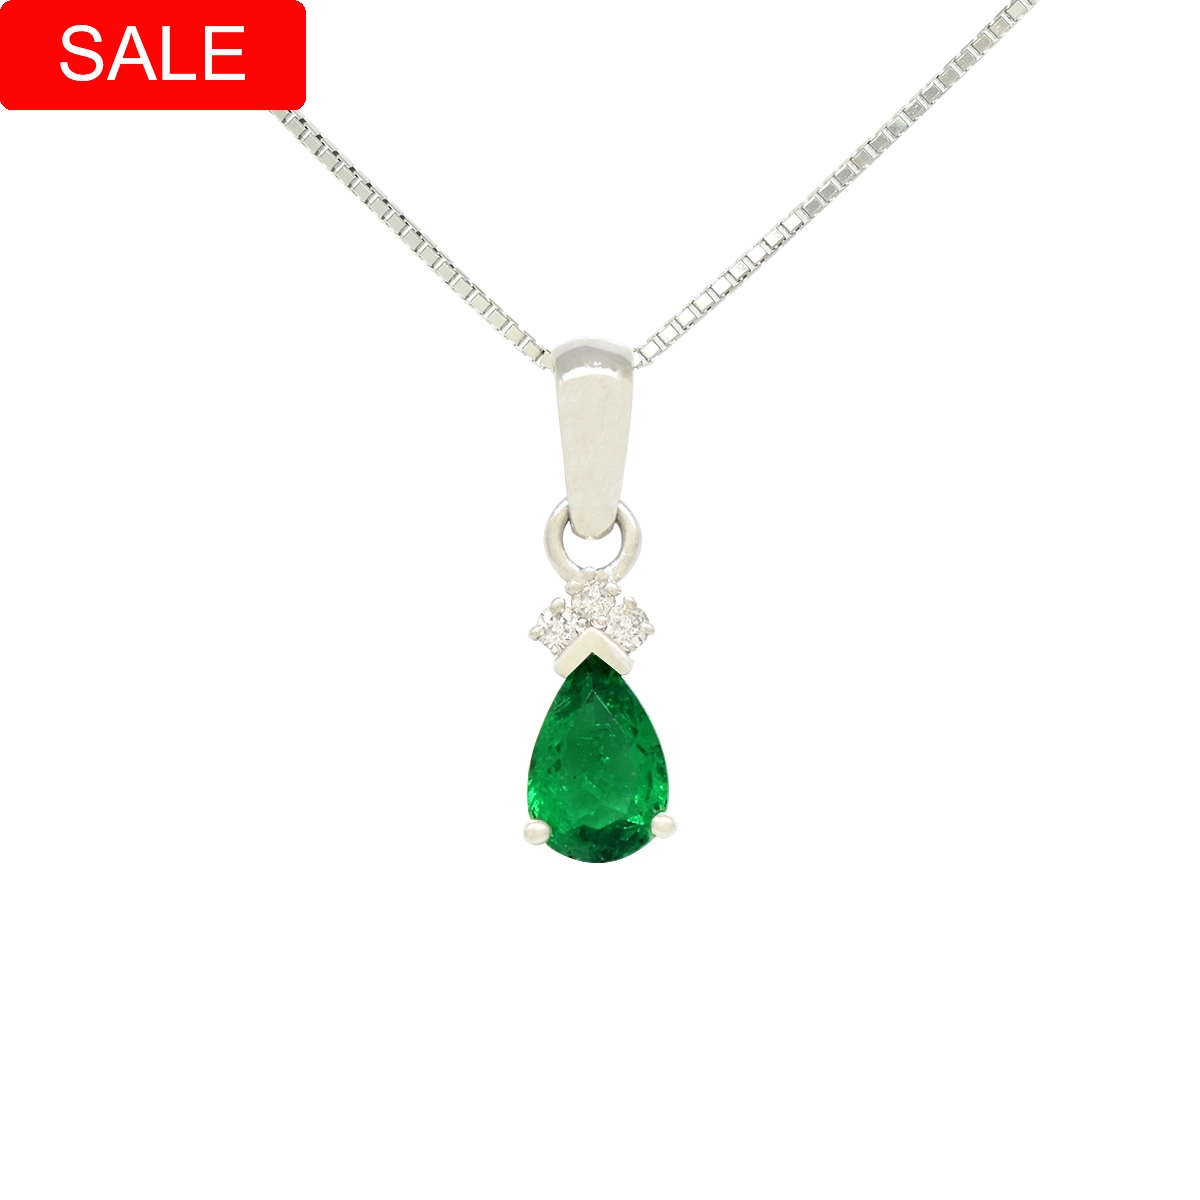 Emerald and diamond pendant necklace in 18K white gold with 0.60 Ct. pear-shaped natural Colombian emerald and 0.04 Ct. t.w. in 3 round cut genuine diamonds